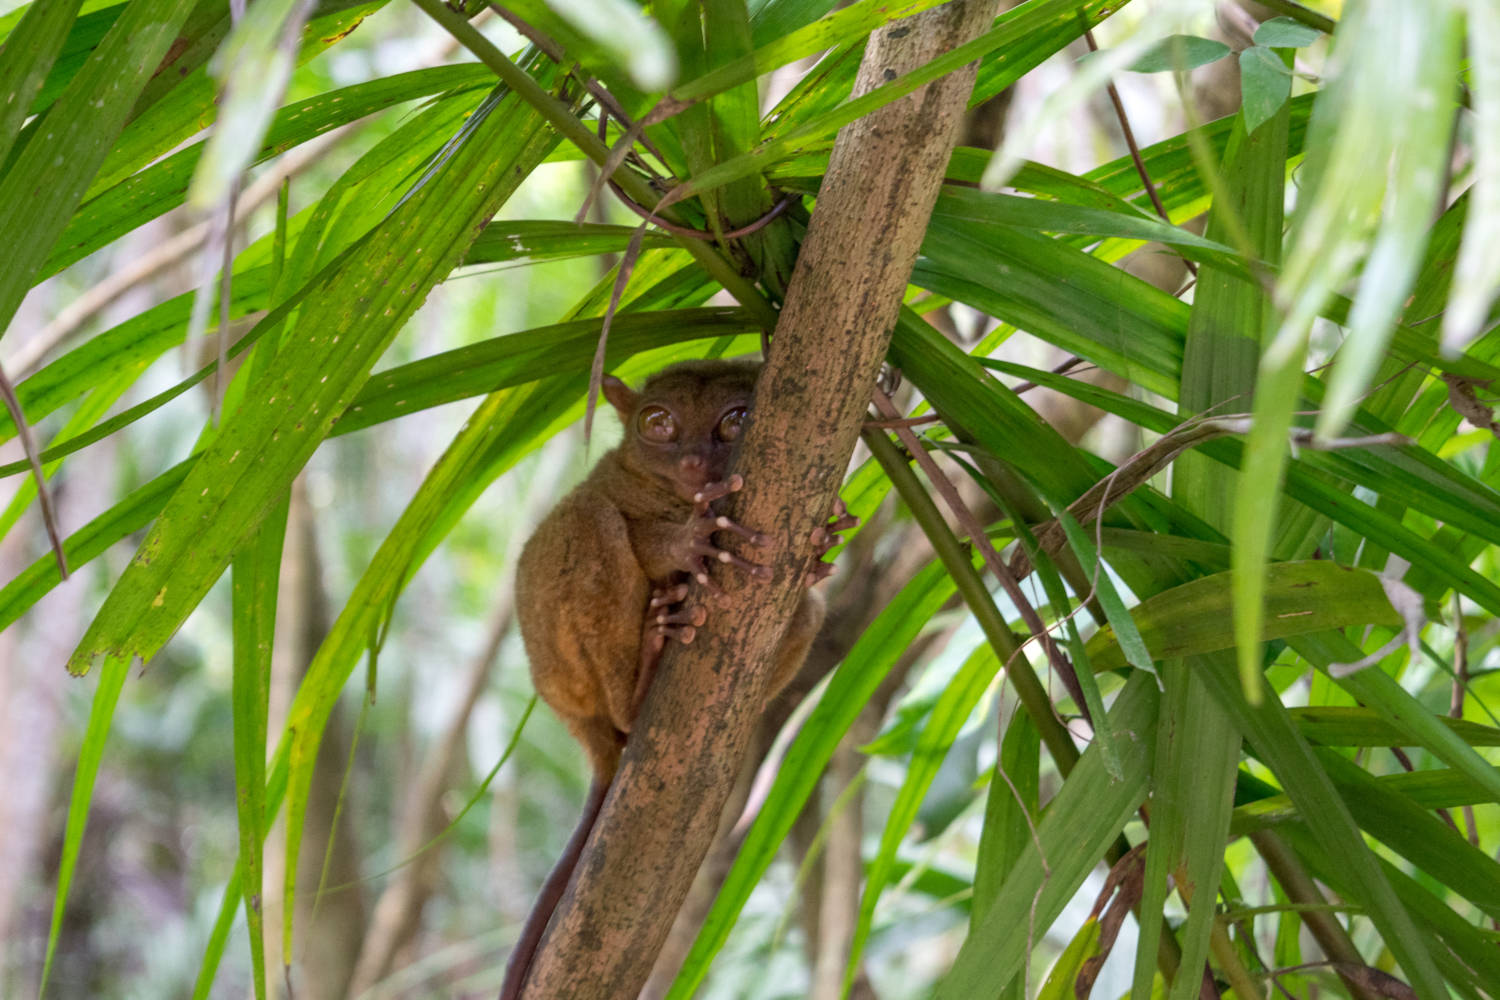 Tarsier Sanctuary Bohol - How To See All Of Bohol Philippines In A Day #bohol #tarsier #chocolatehills